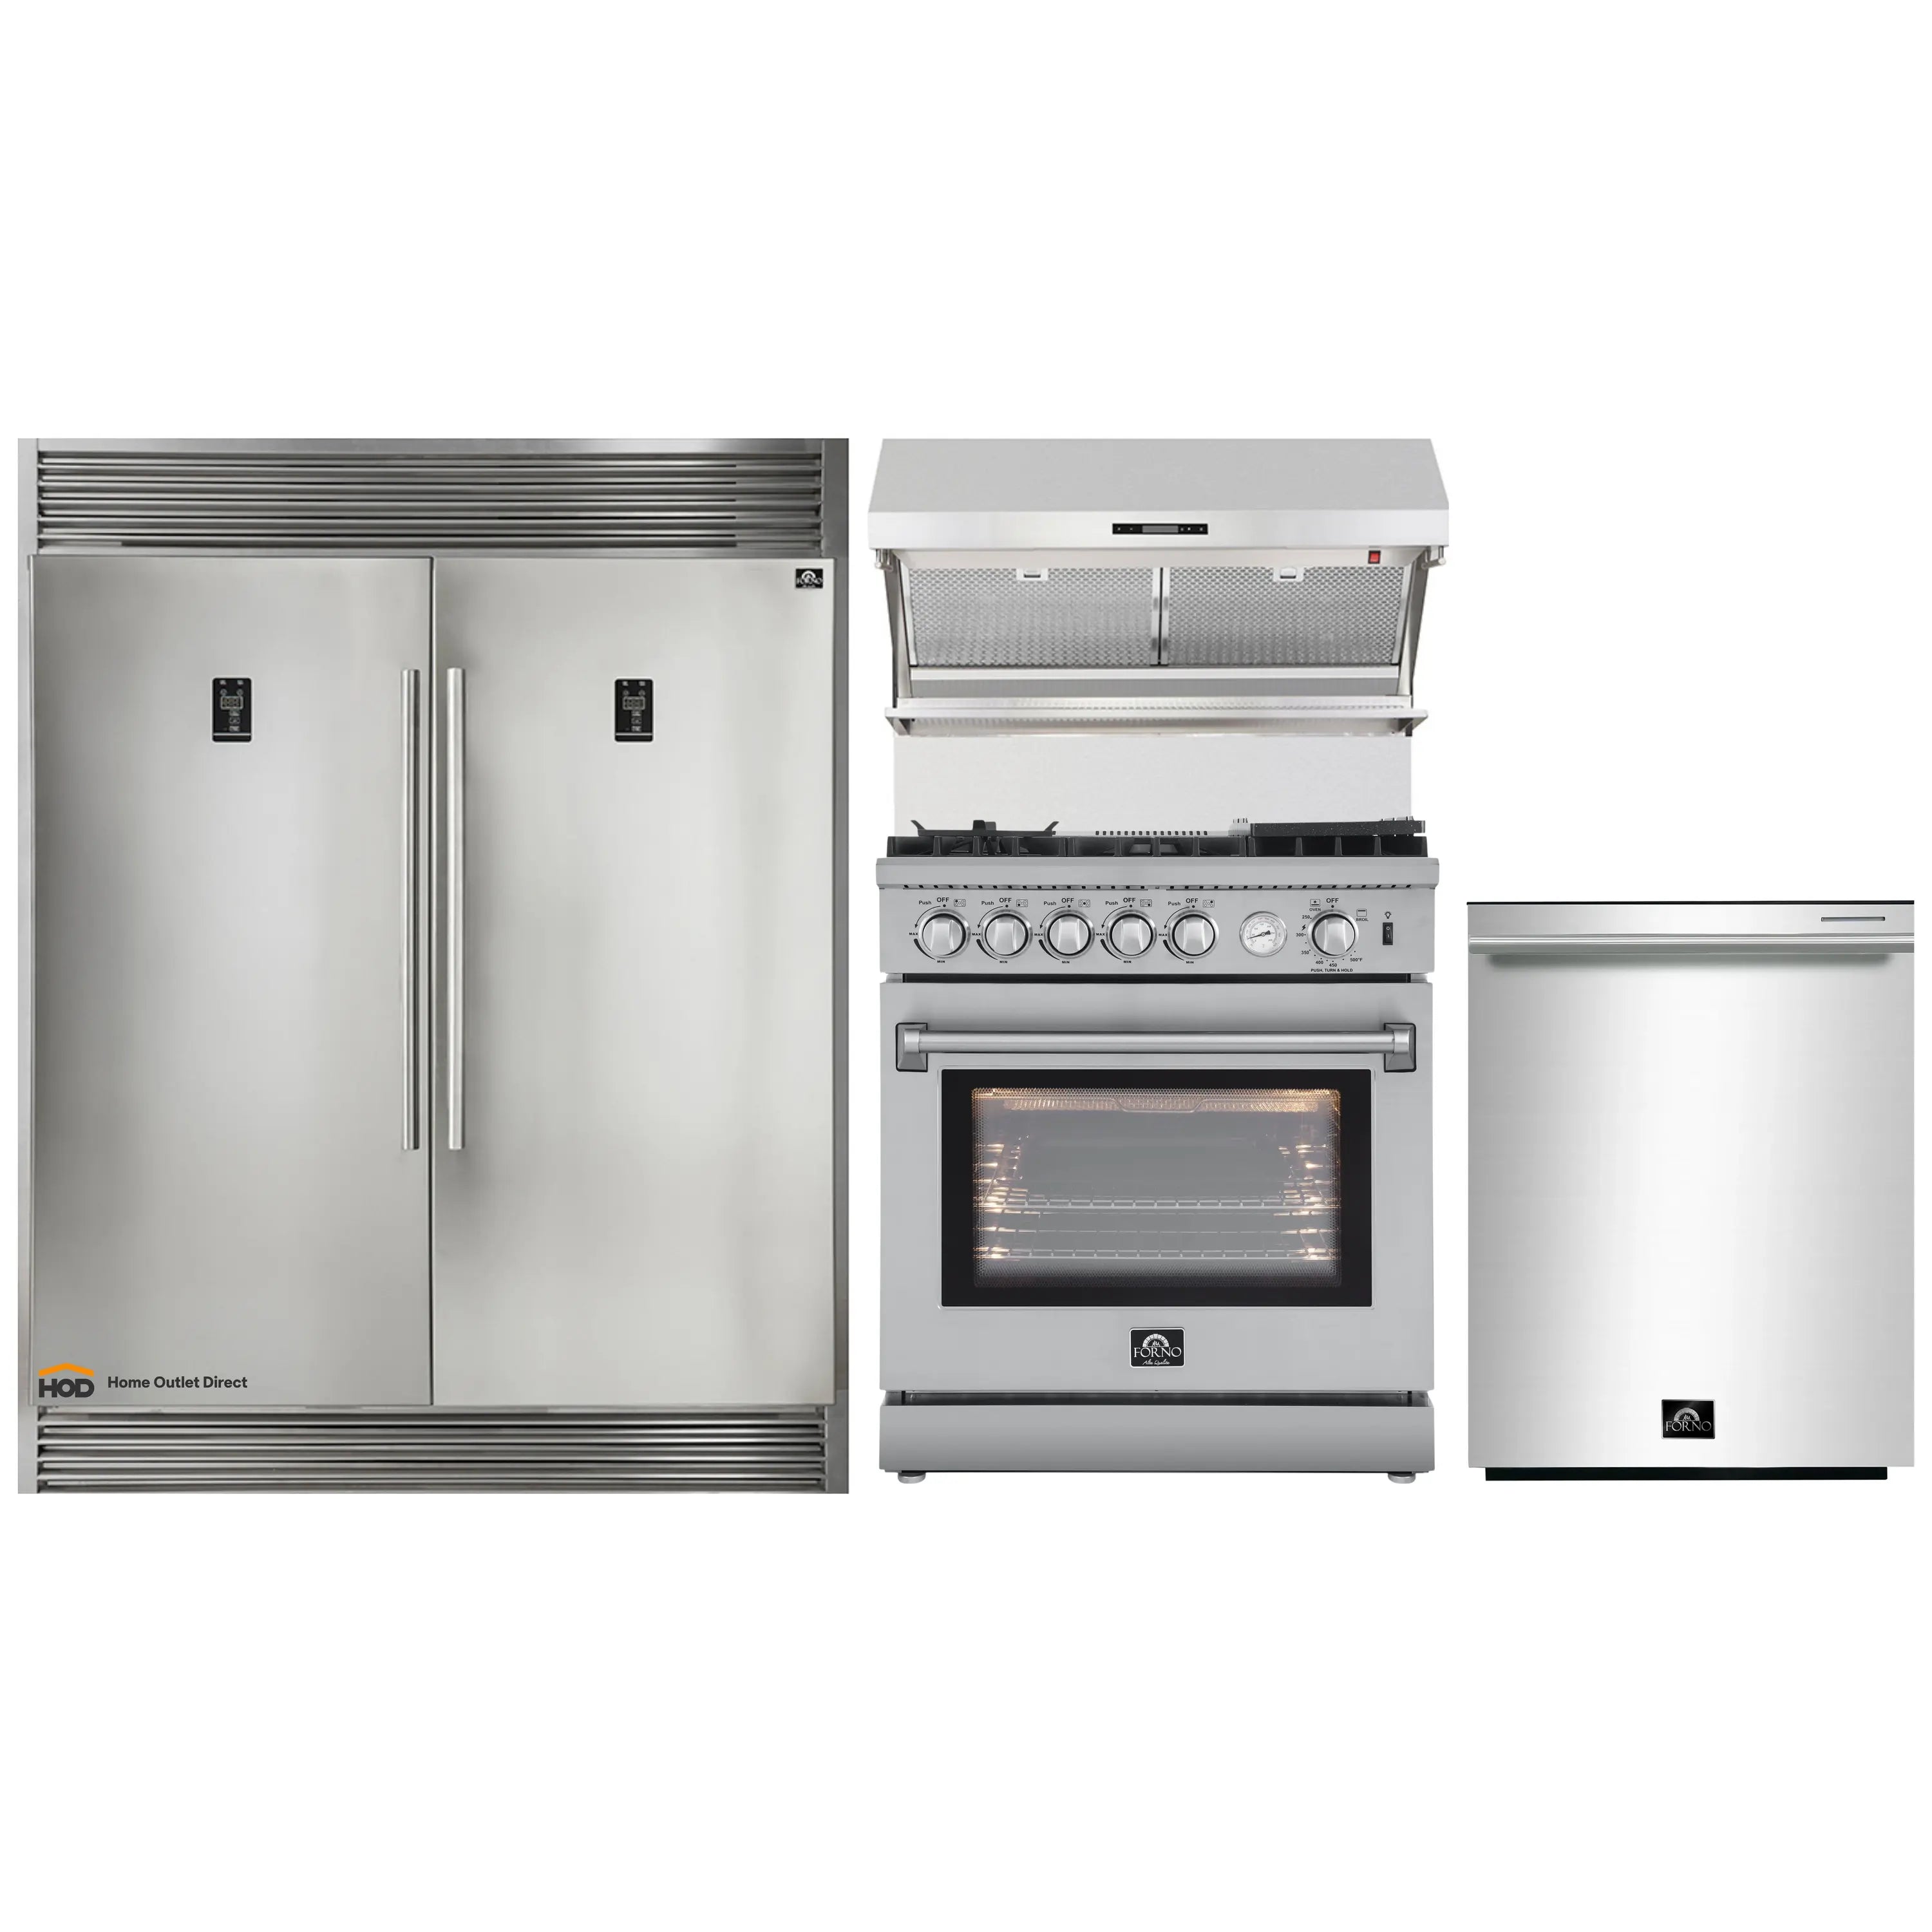 Forno 4-Piece Appliance Package - 30-Inch Gas Range with Air Fyer, 56-Inch Pro-Style Refrigerator, Wall Mount Hood with Backsplash, & 3-Rack Dishwasher in Stainless Steel